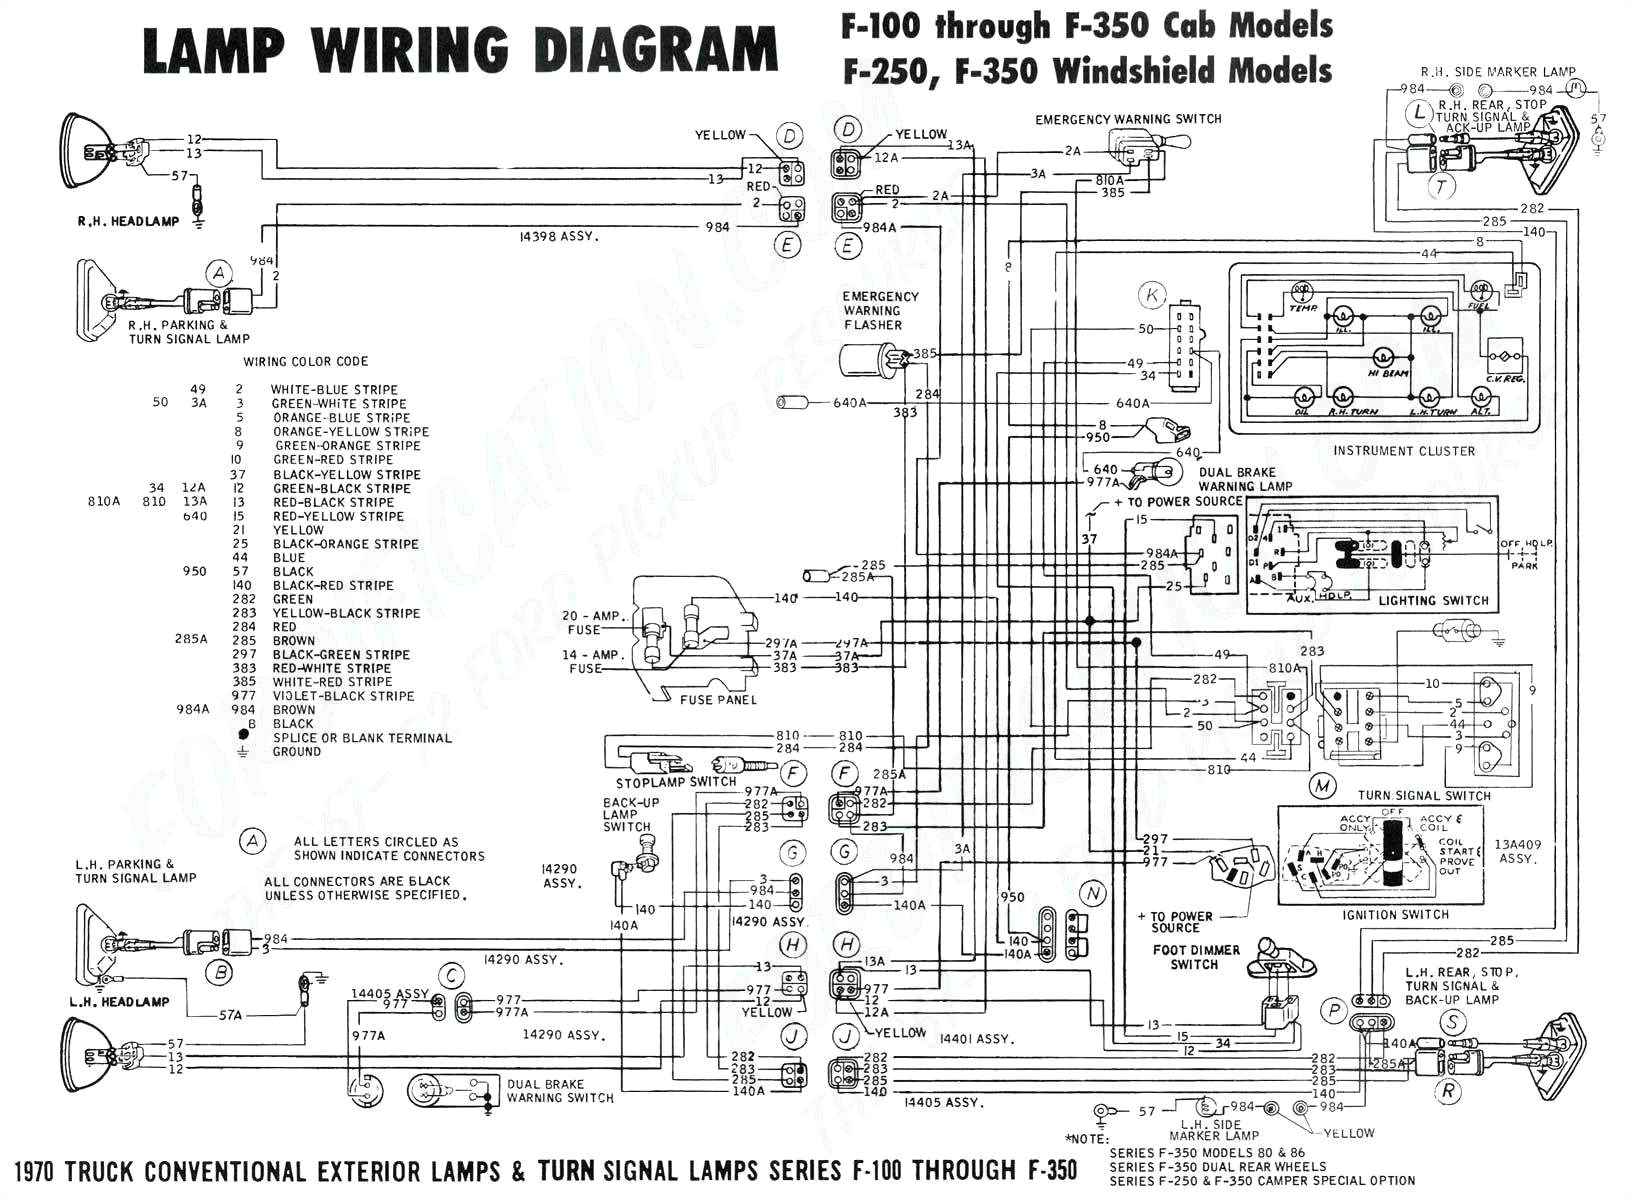 1986 chevy s10 vacuum diagram likewise 92 chevy silverado heater wiring diagram as well chevy 350 heater hose routing further chevy